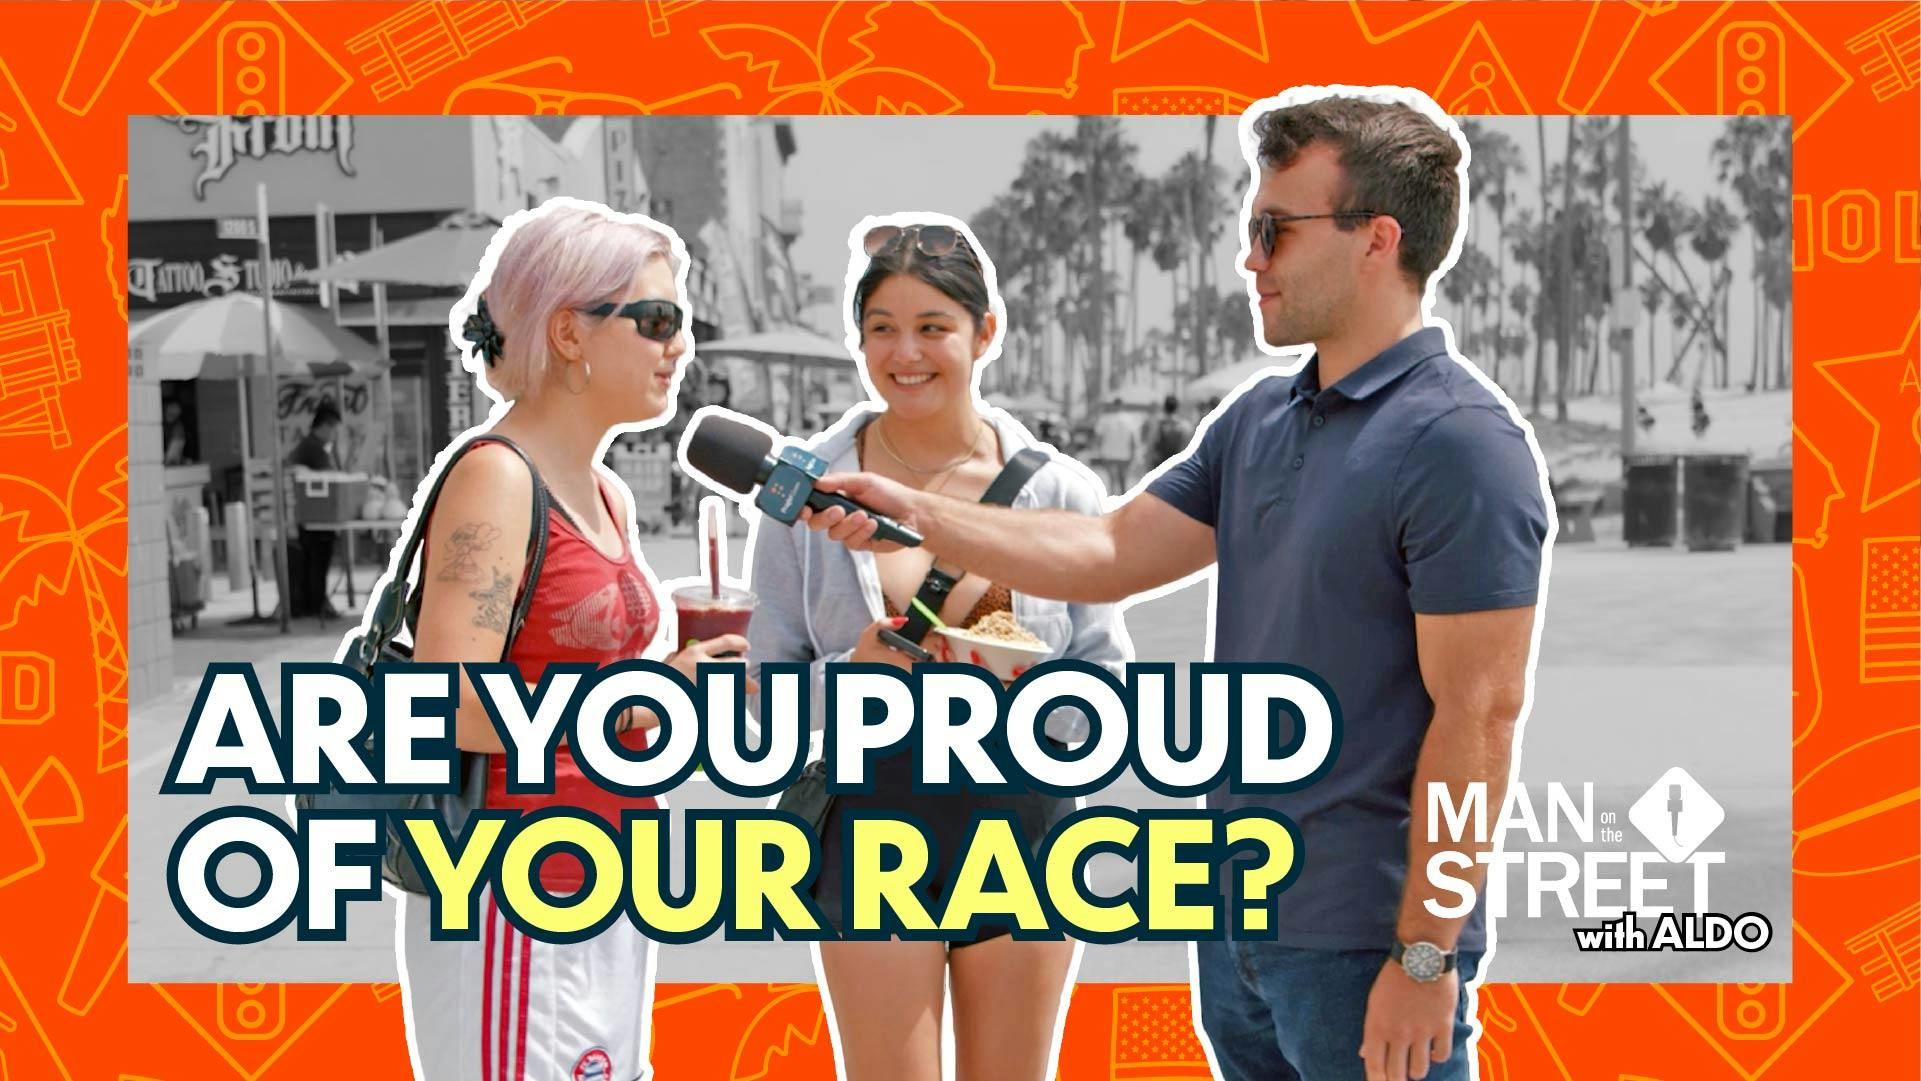 Are You Proud of Your Race?